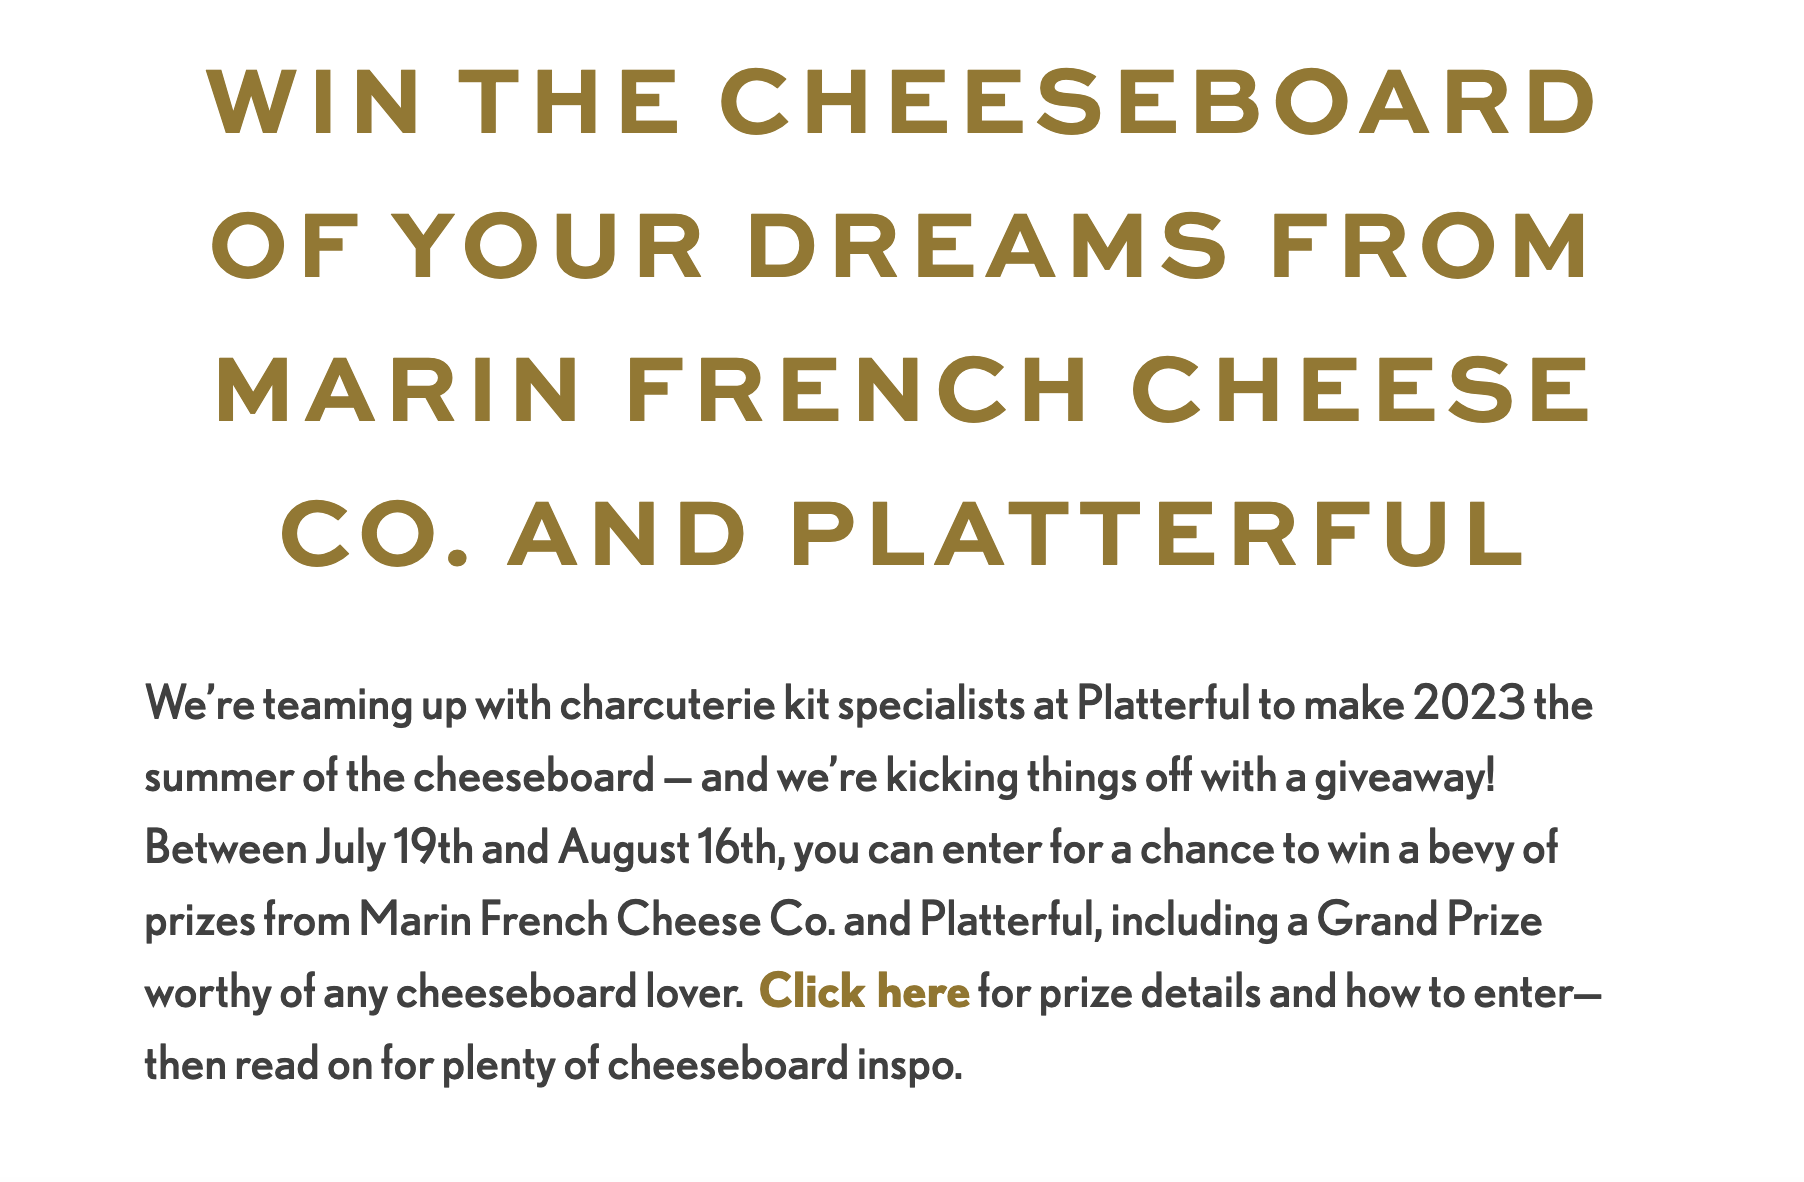 Marin French Cheese Co giveaway prize details